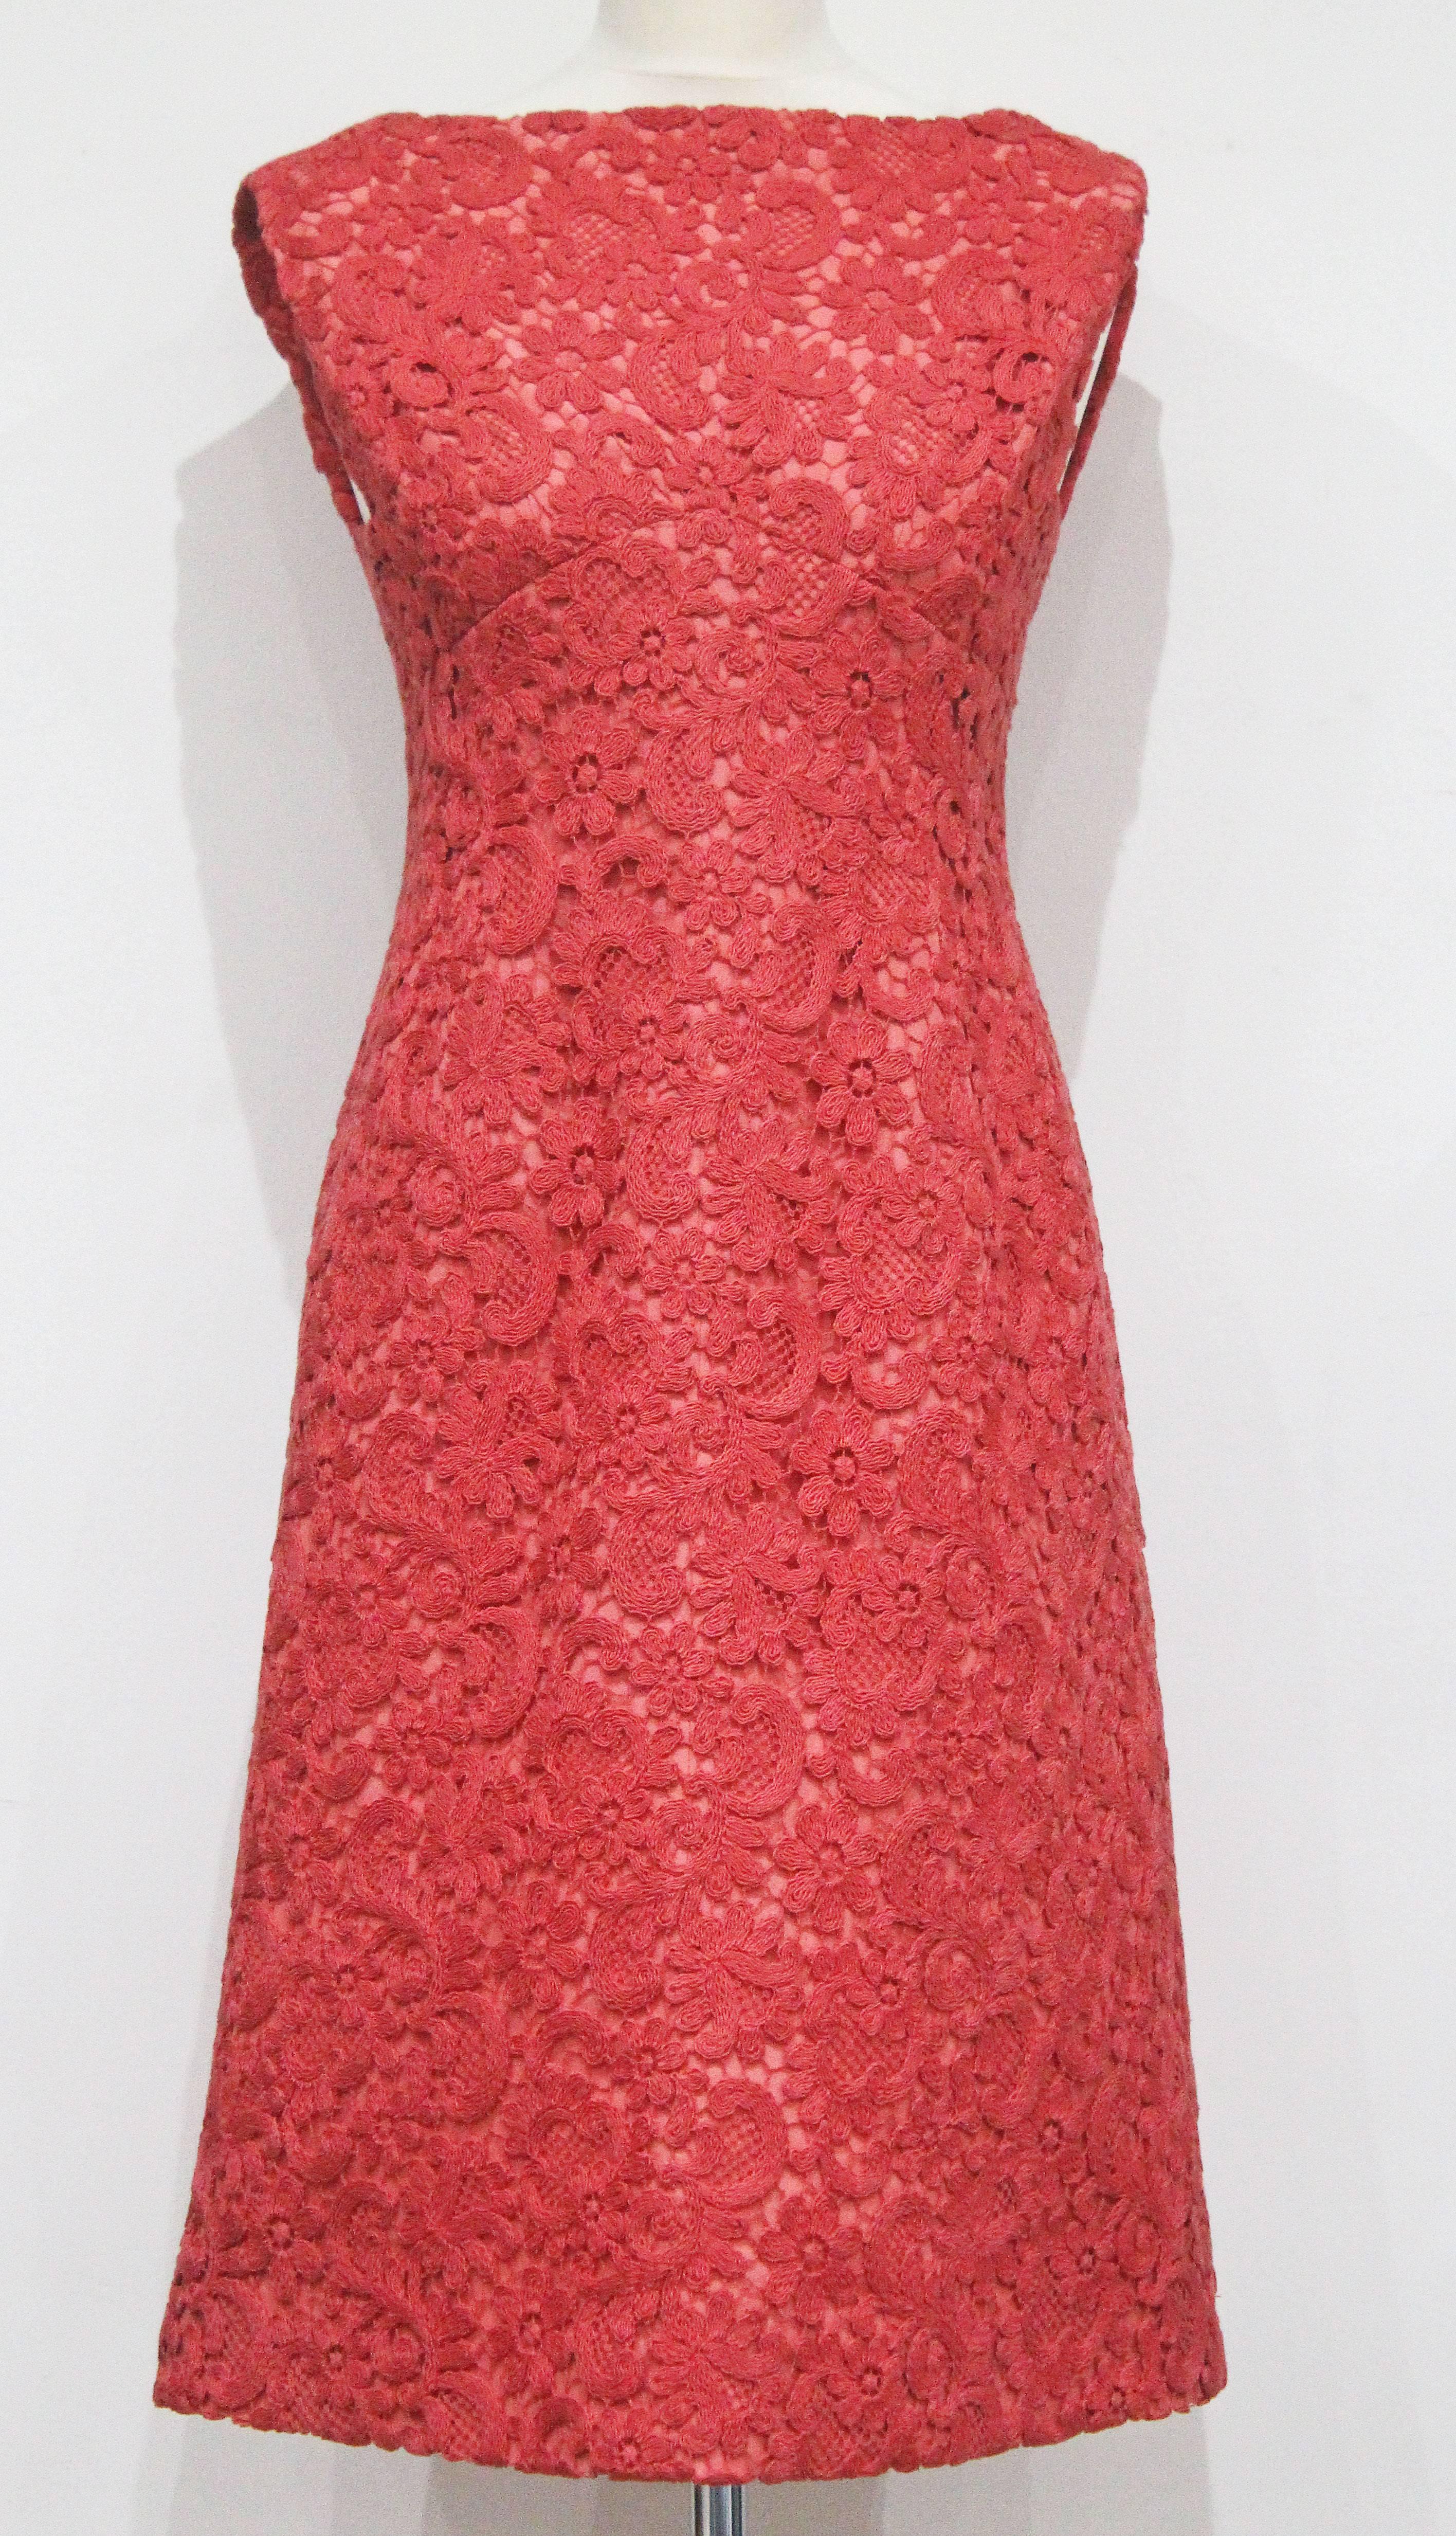 A haute couture macrame lace Rose Bertin structured  A-line dress in coral silk. Audrey Hepburn famously wore Rose Bertin designs during the 1960s and early 1970s, all the designs were made to order for very special clients. 

No size label,